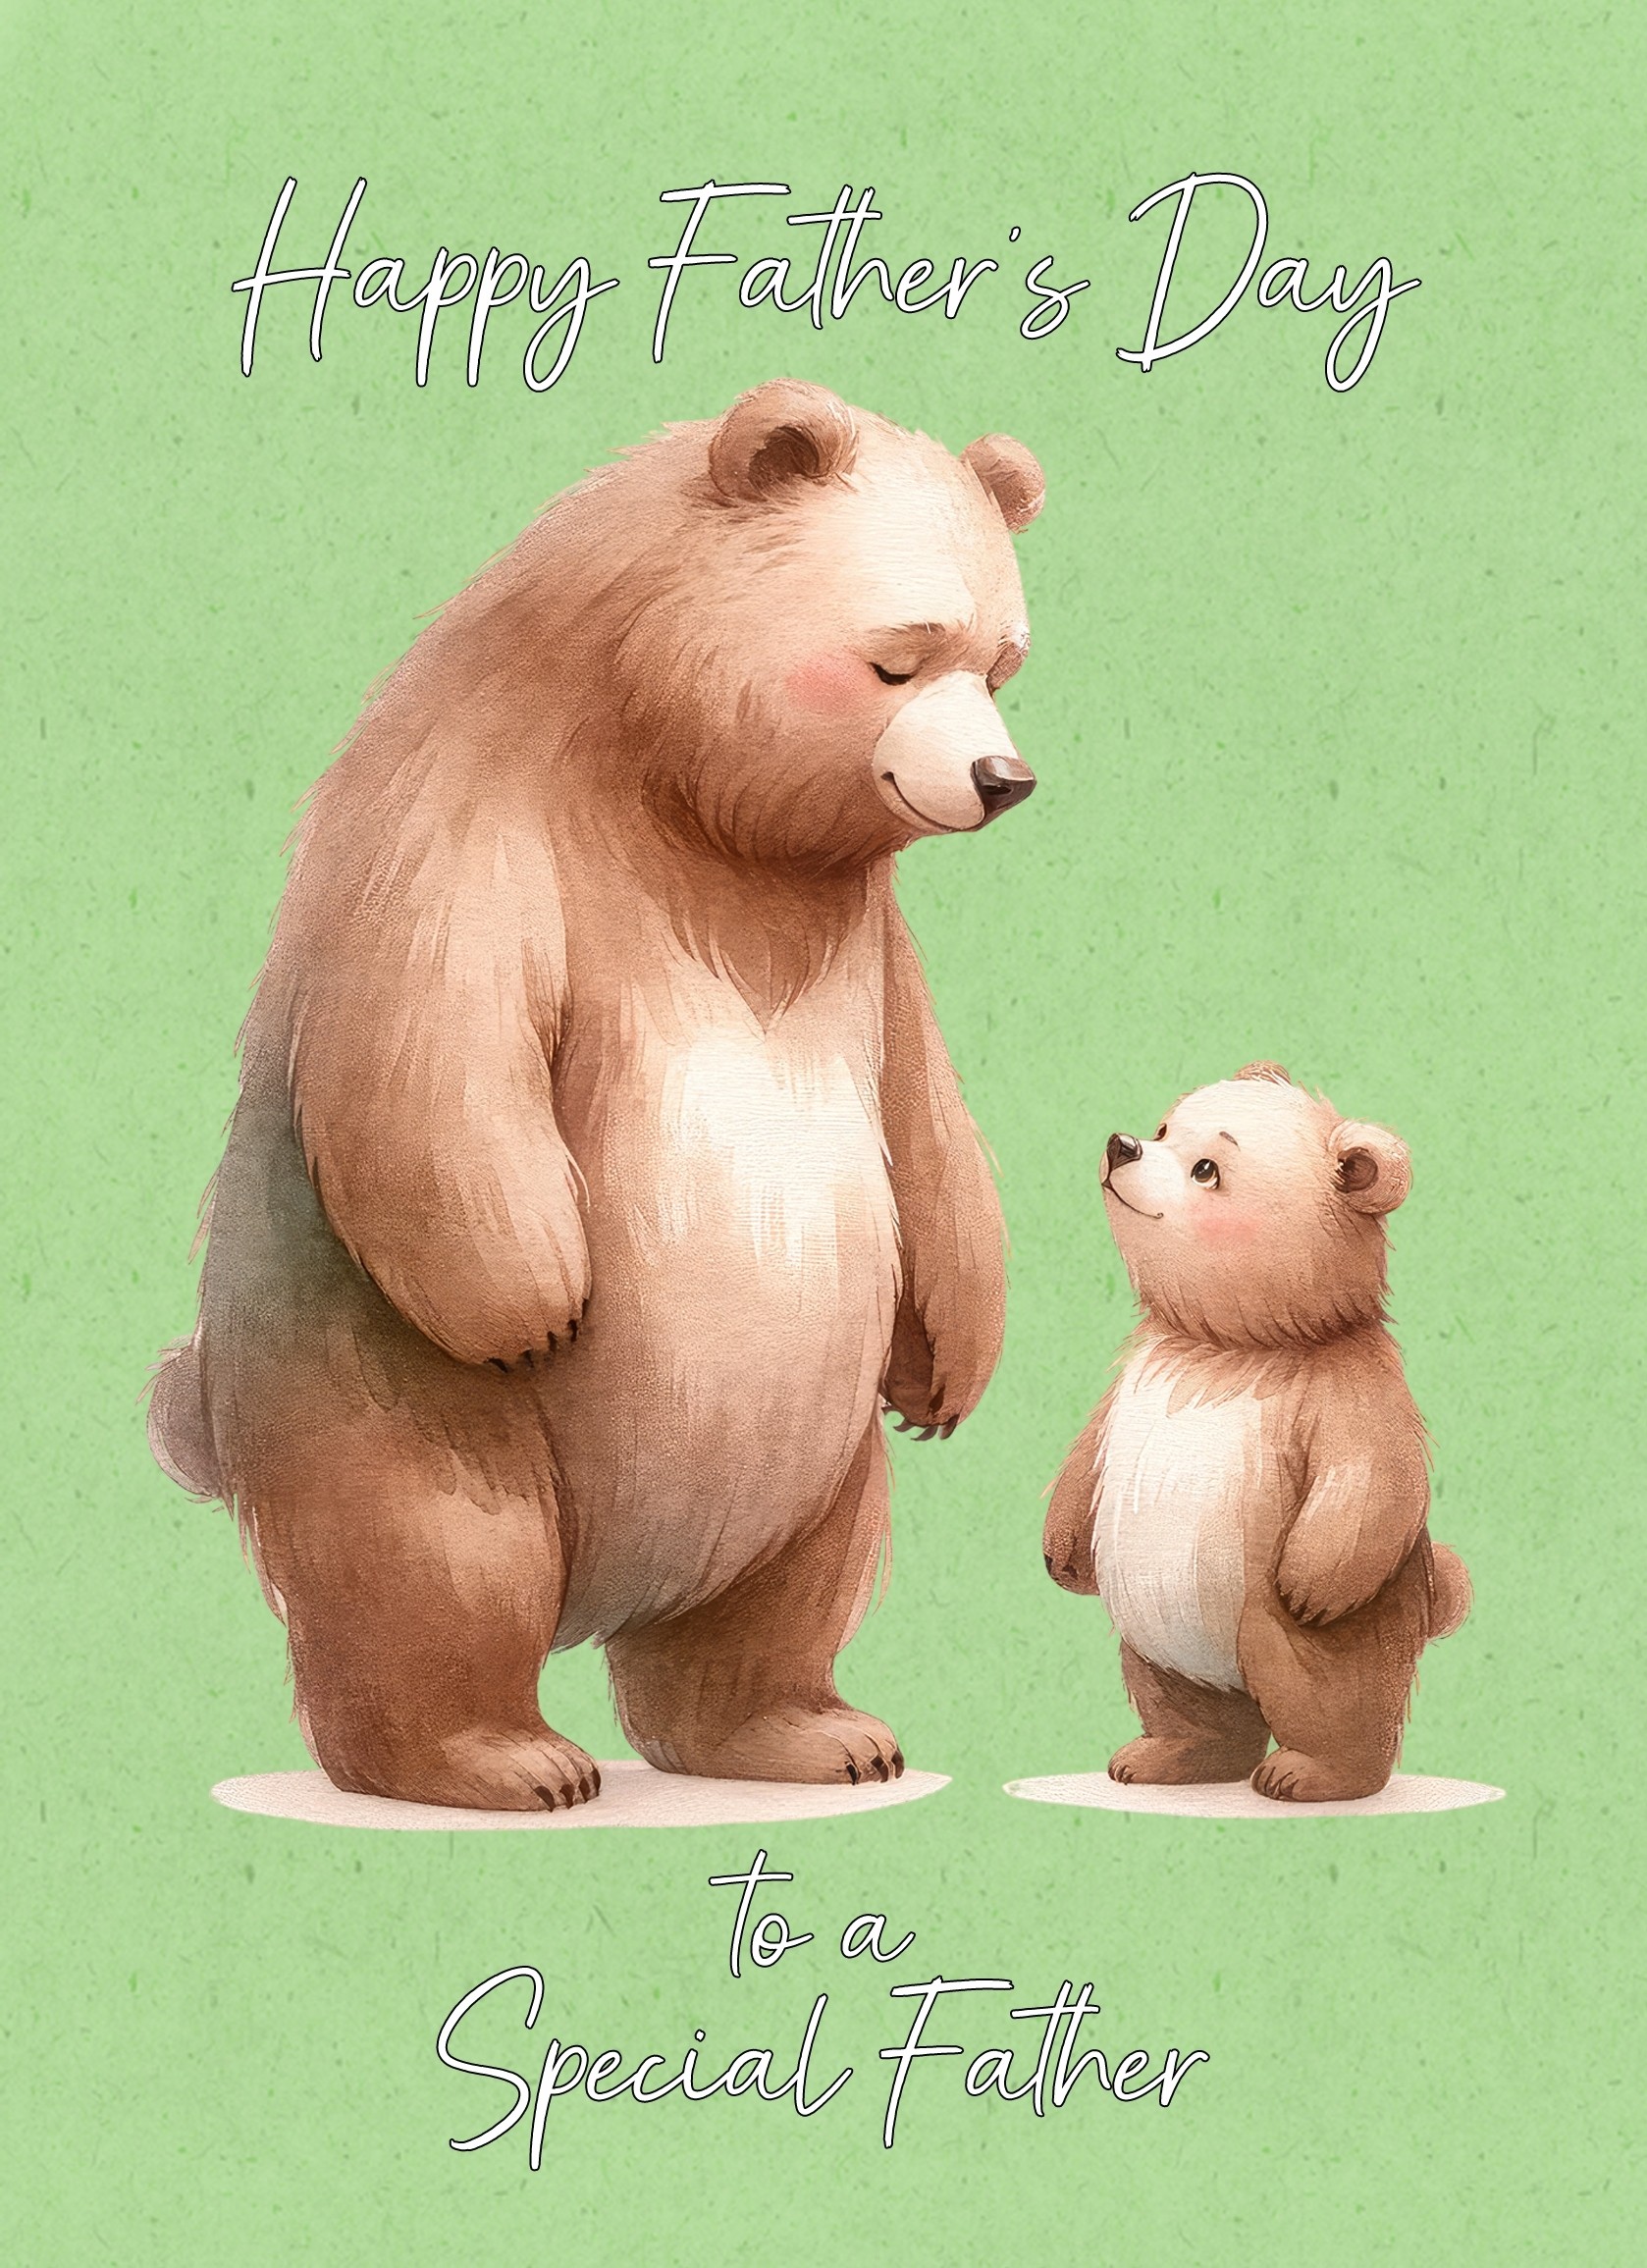 Father and Child Bear Art Fathers Day Card For Father (Design 2)